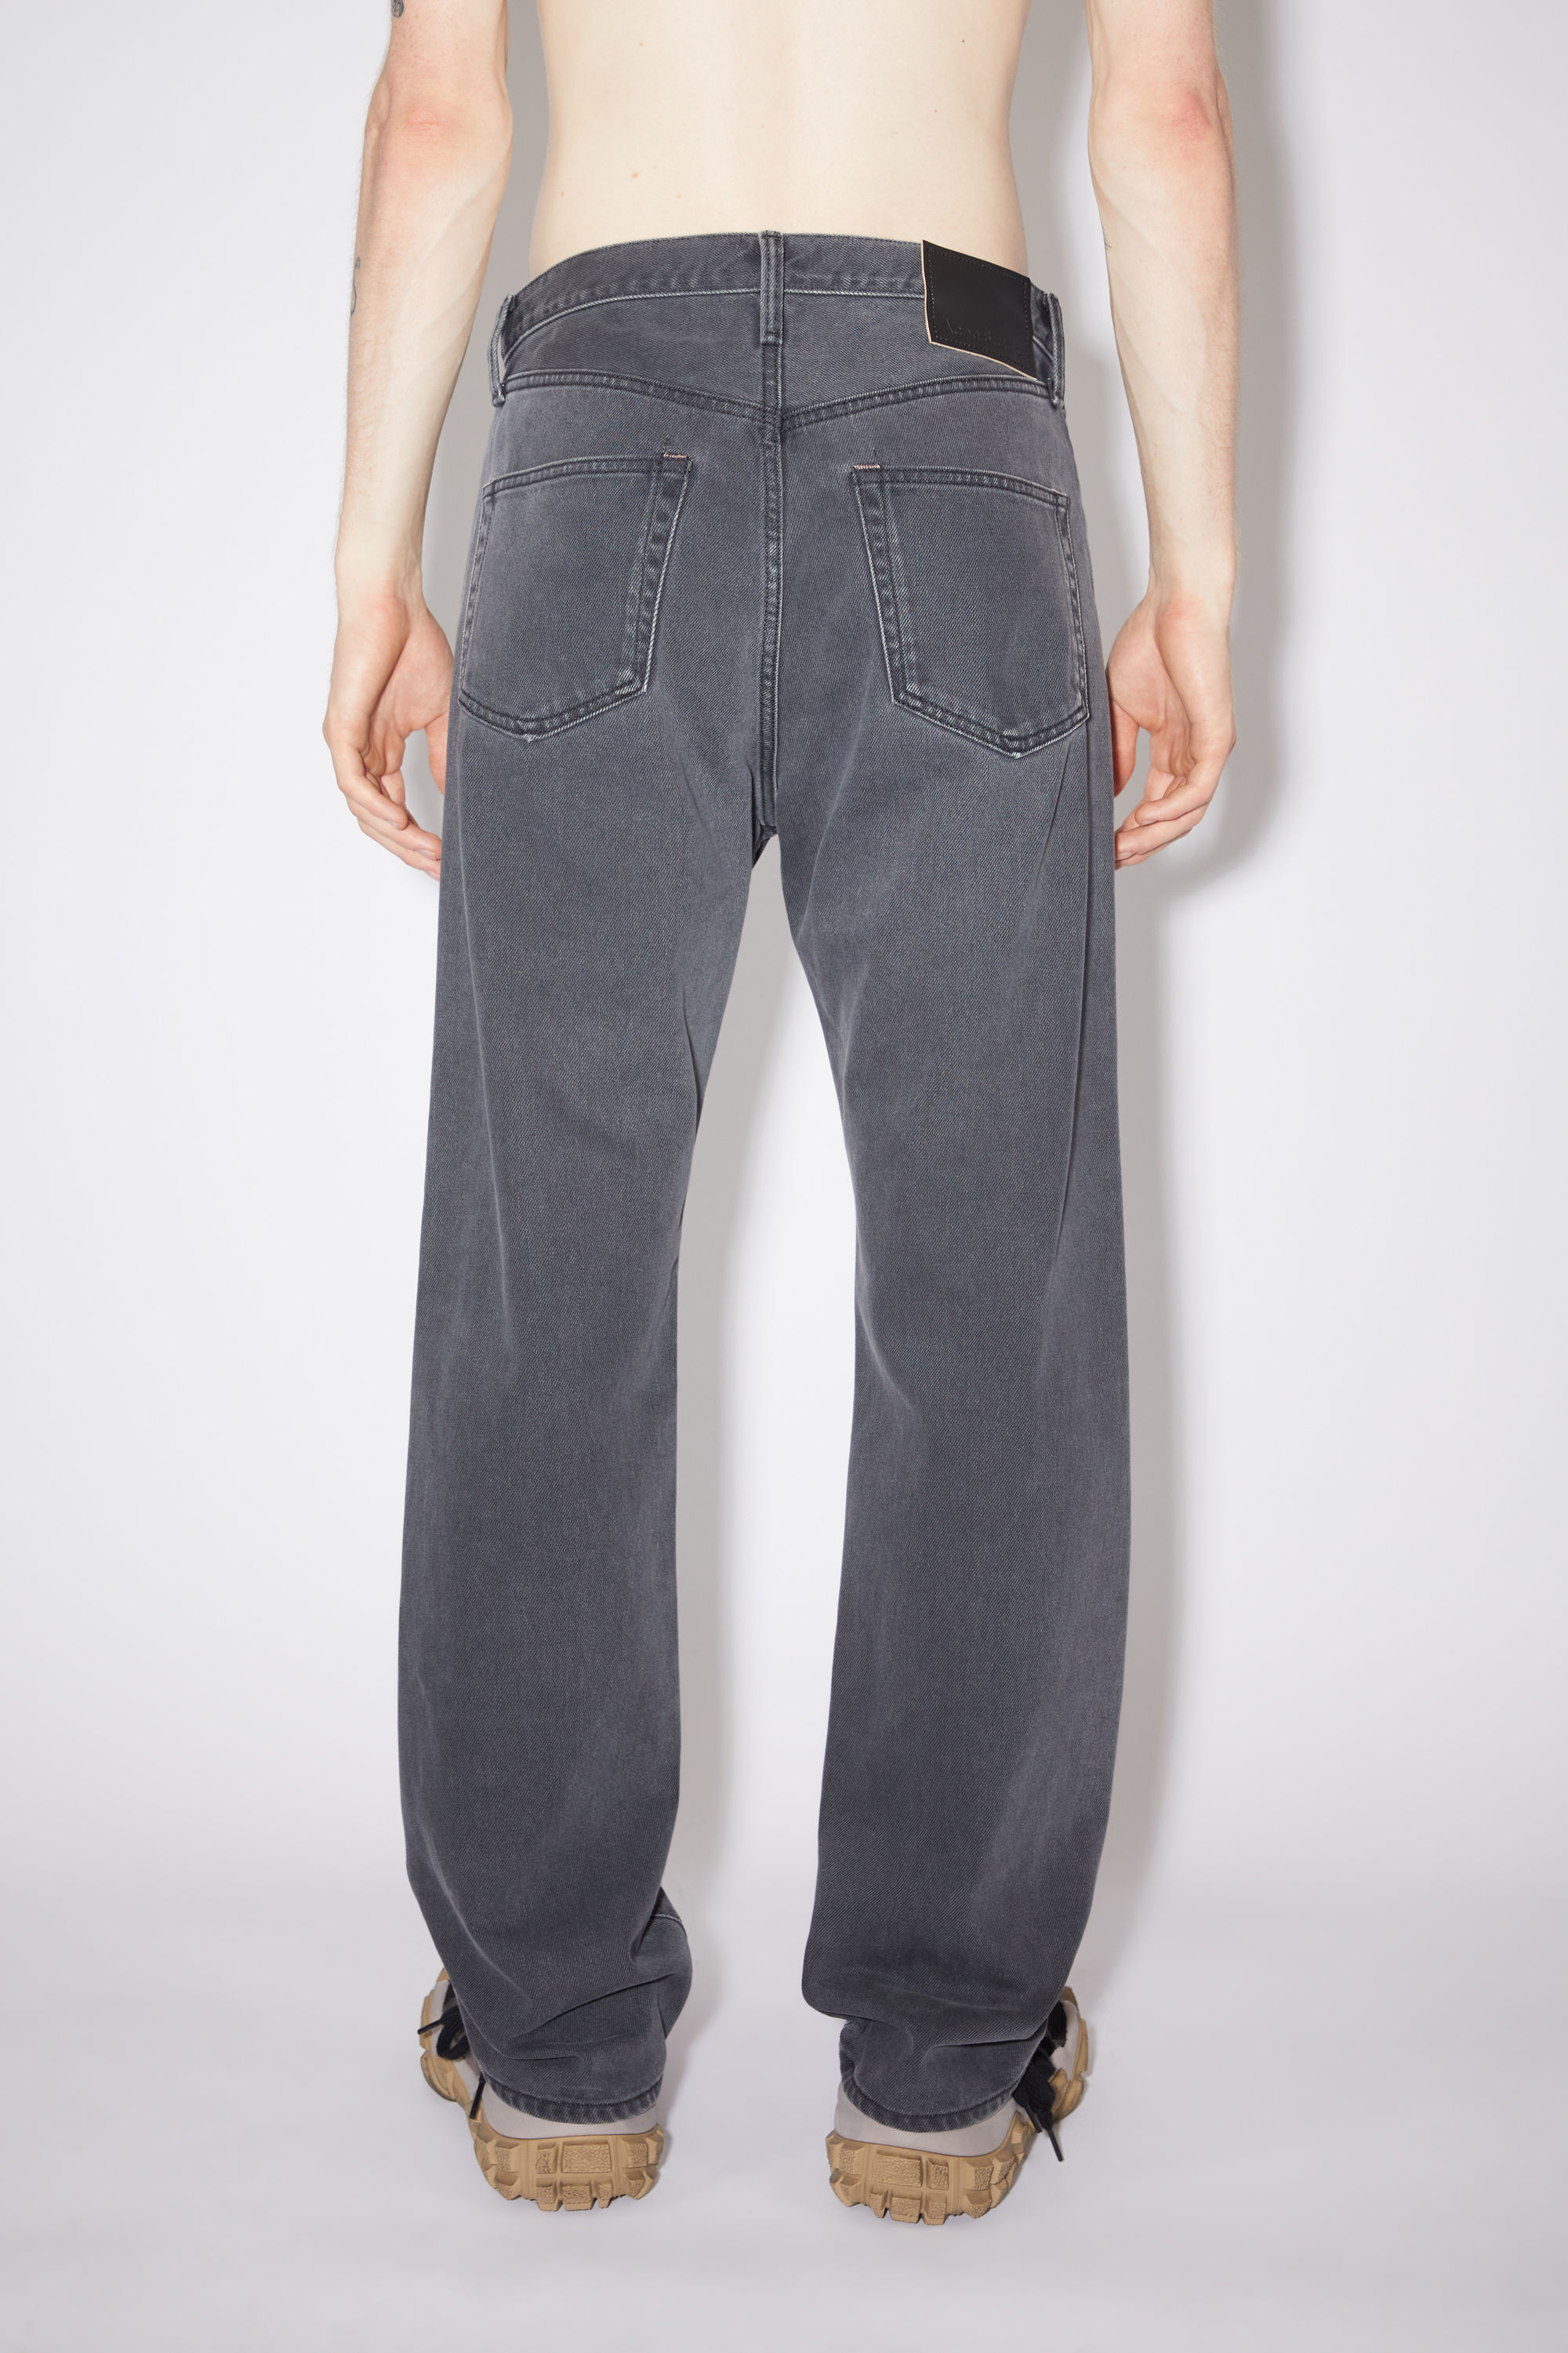 acne studious 20aw 2003 washed out gray | nate-hospital.com